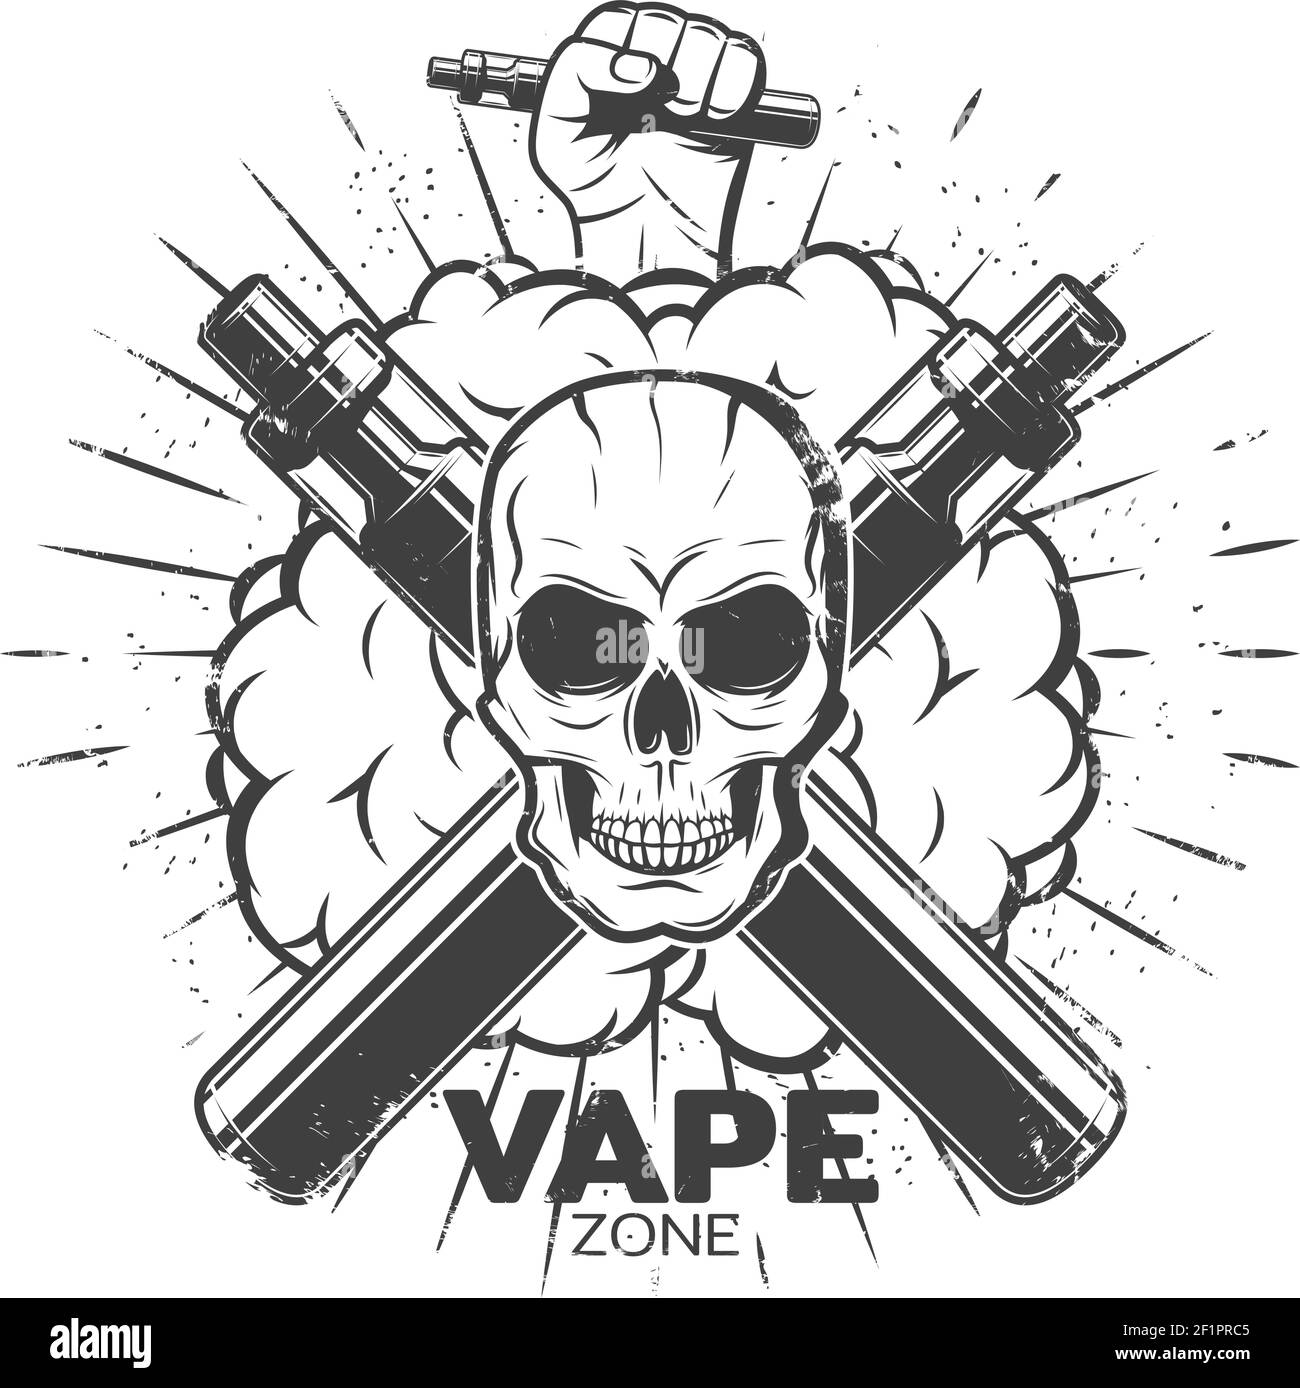 Vintage vape label with skull vaporizers smokes hand holding electronic cigarette and sunburst isolated vector illustration Stock Vector